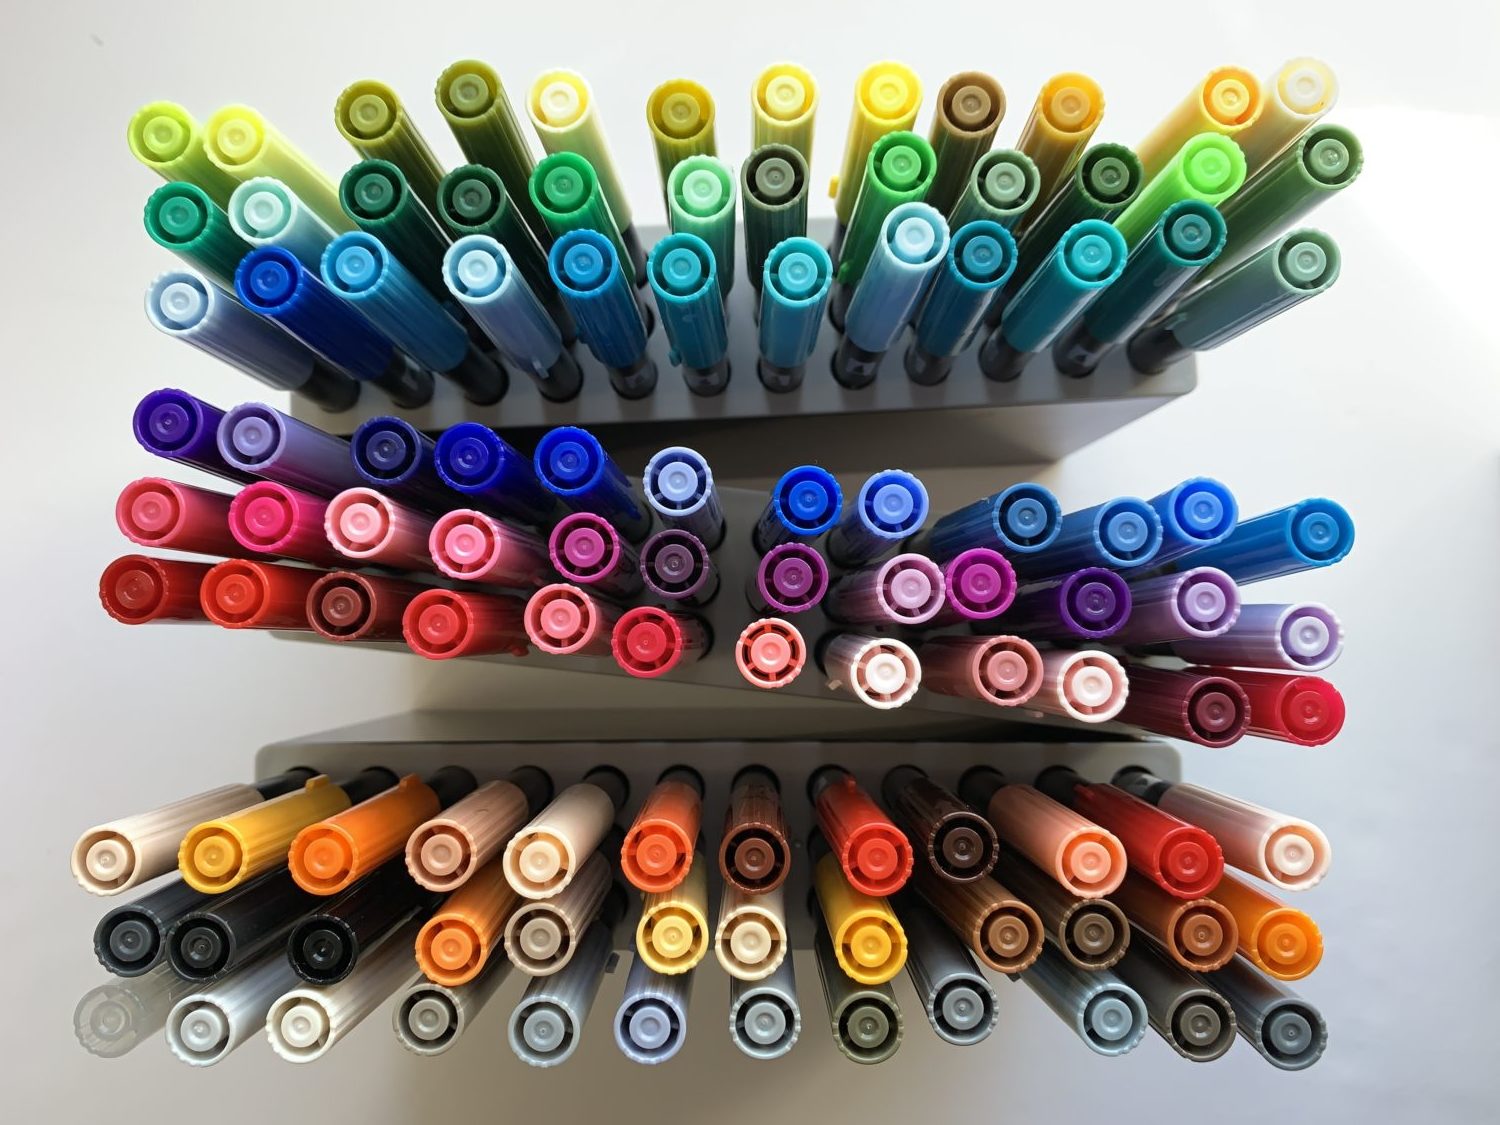 Tombow Dual Brush Pen Review - Should You Buy The Tombow Markers?